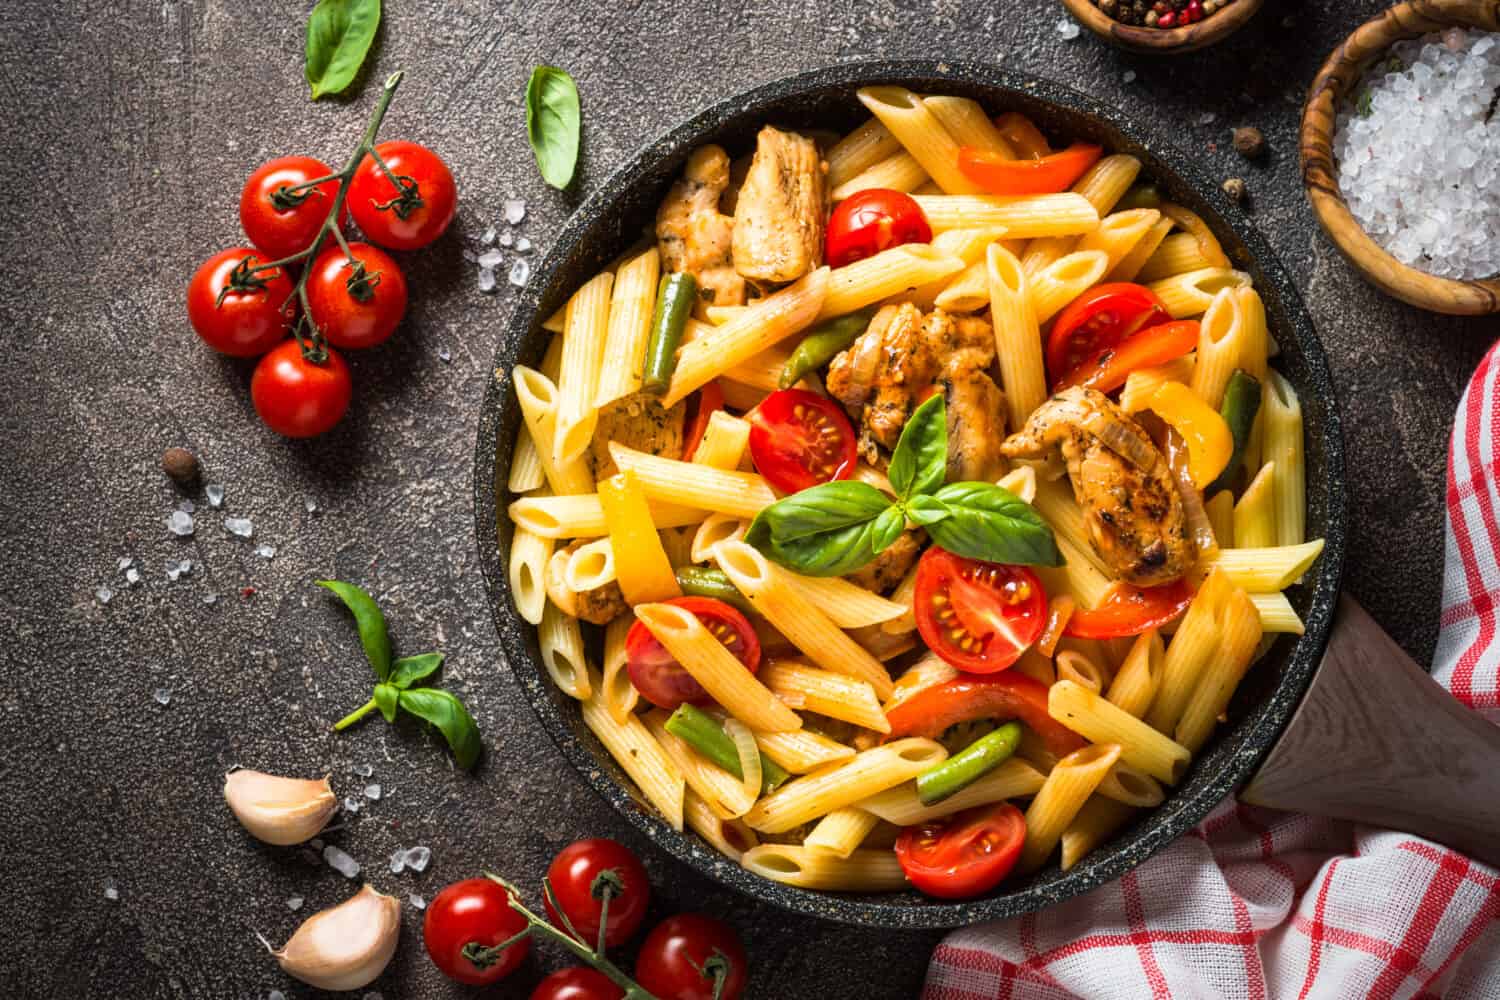 Pasta penne with chicken and vegetables.